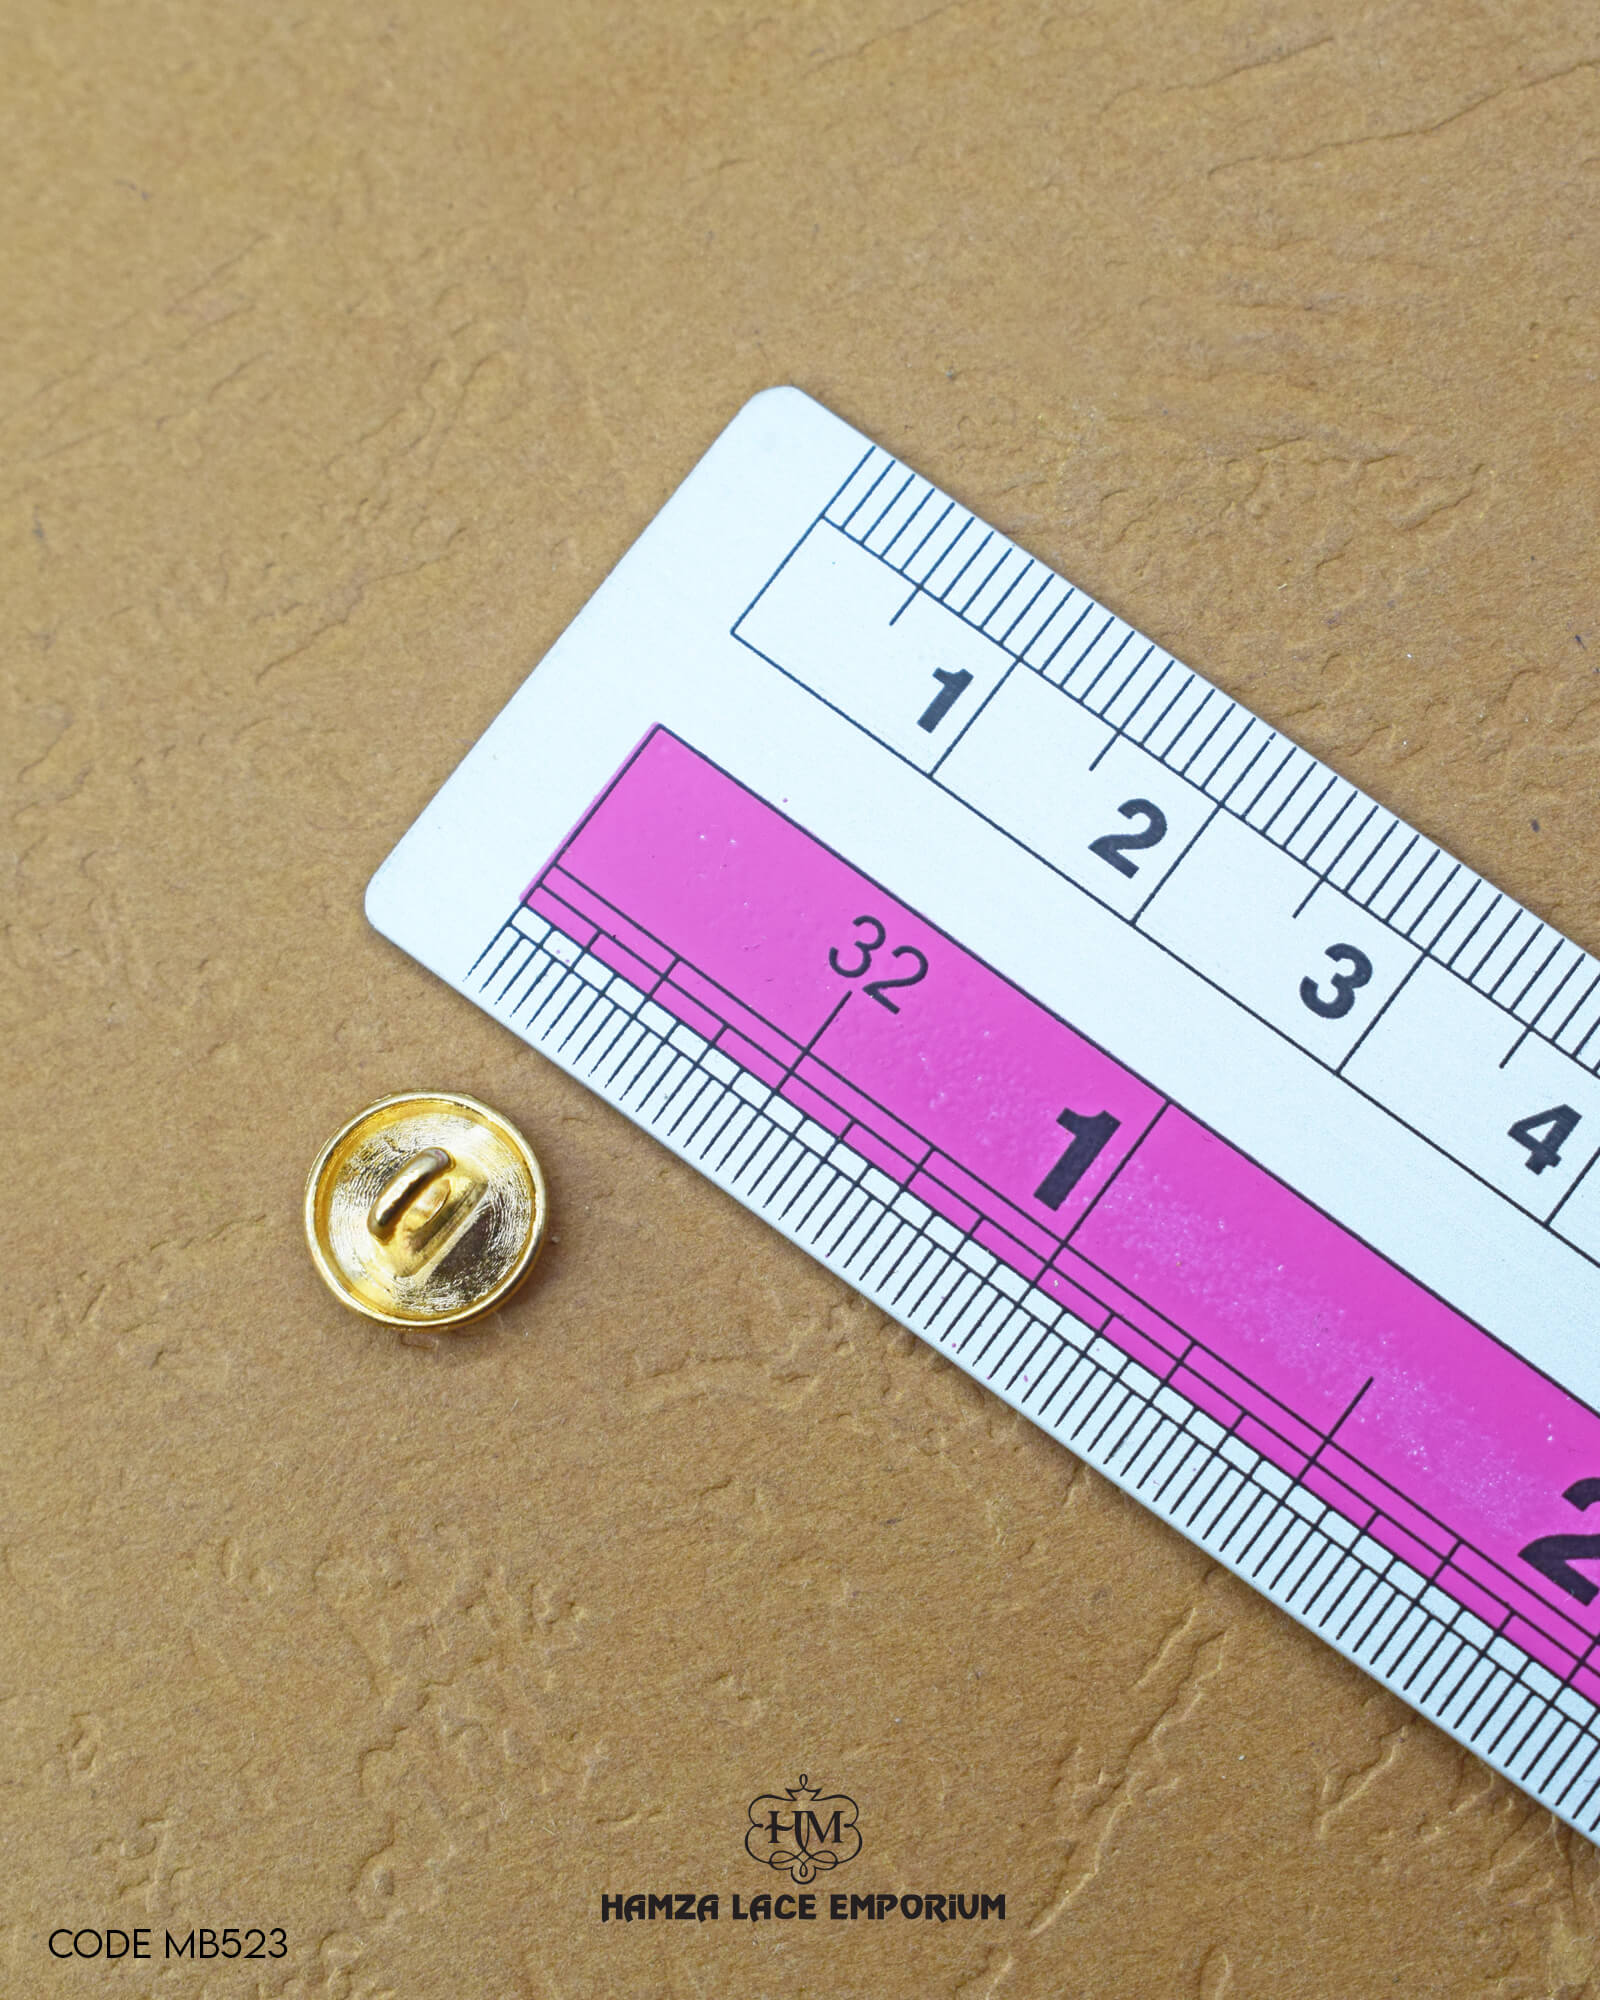 Size of the 'Golden Metal Button MB523' is given with the help of a ruler